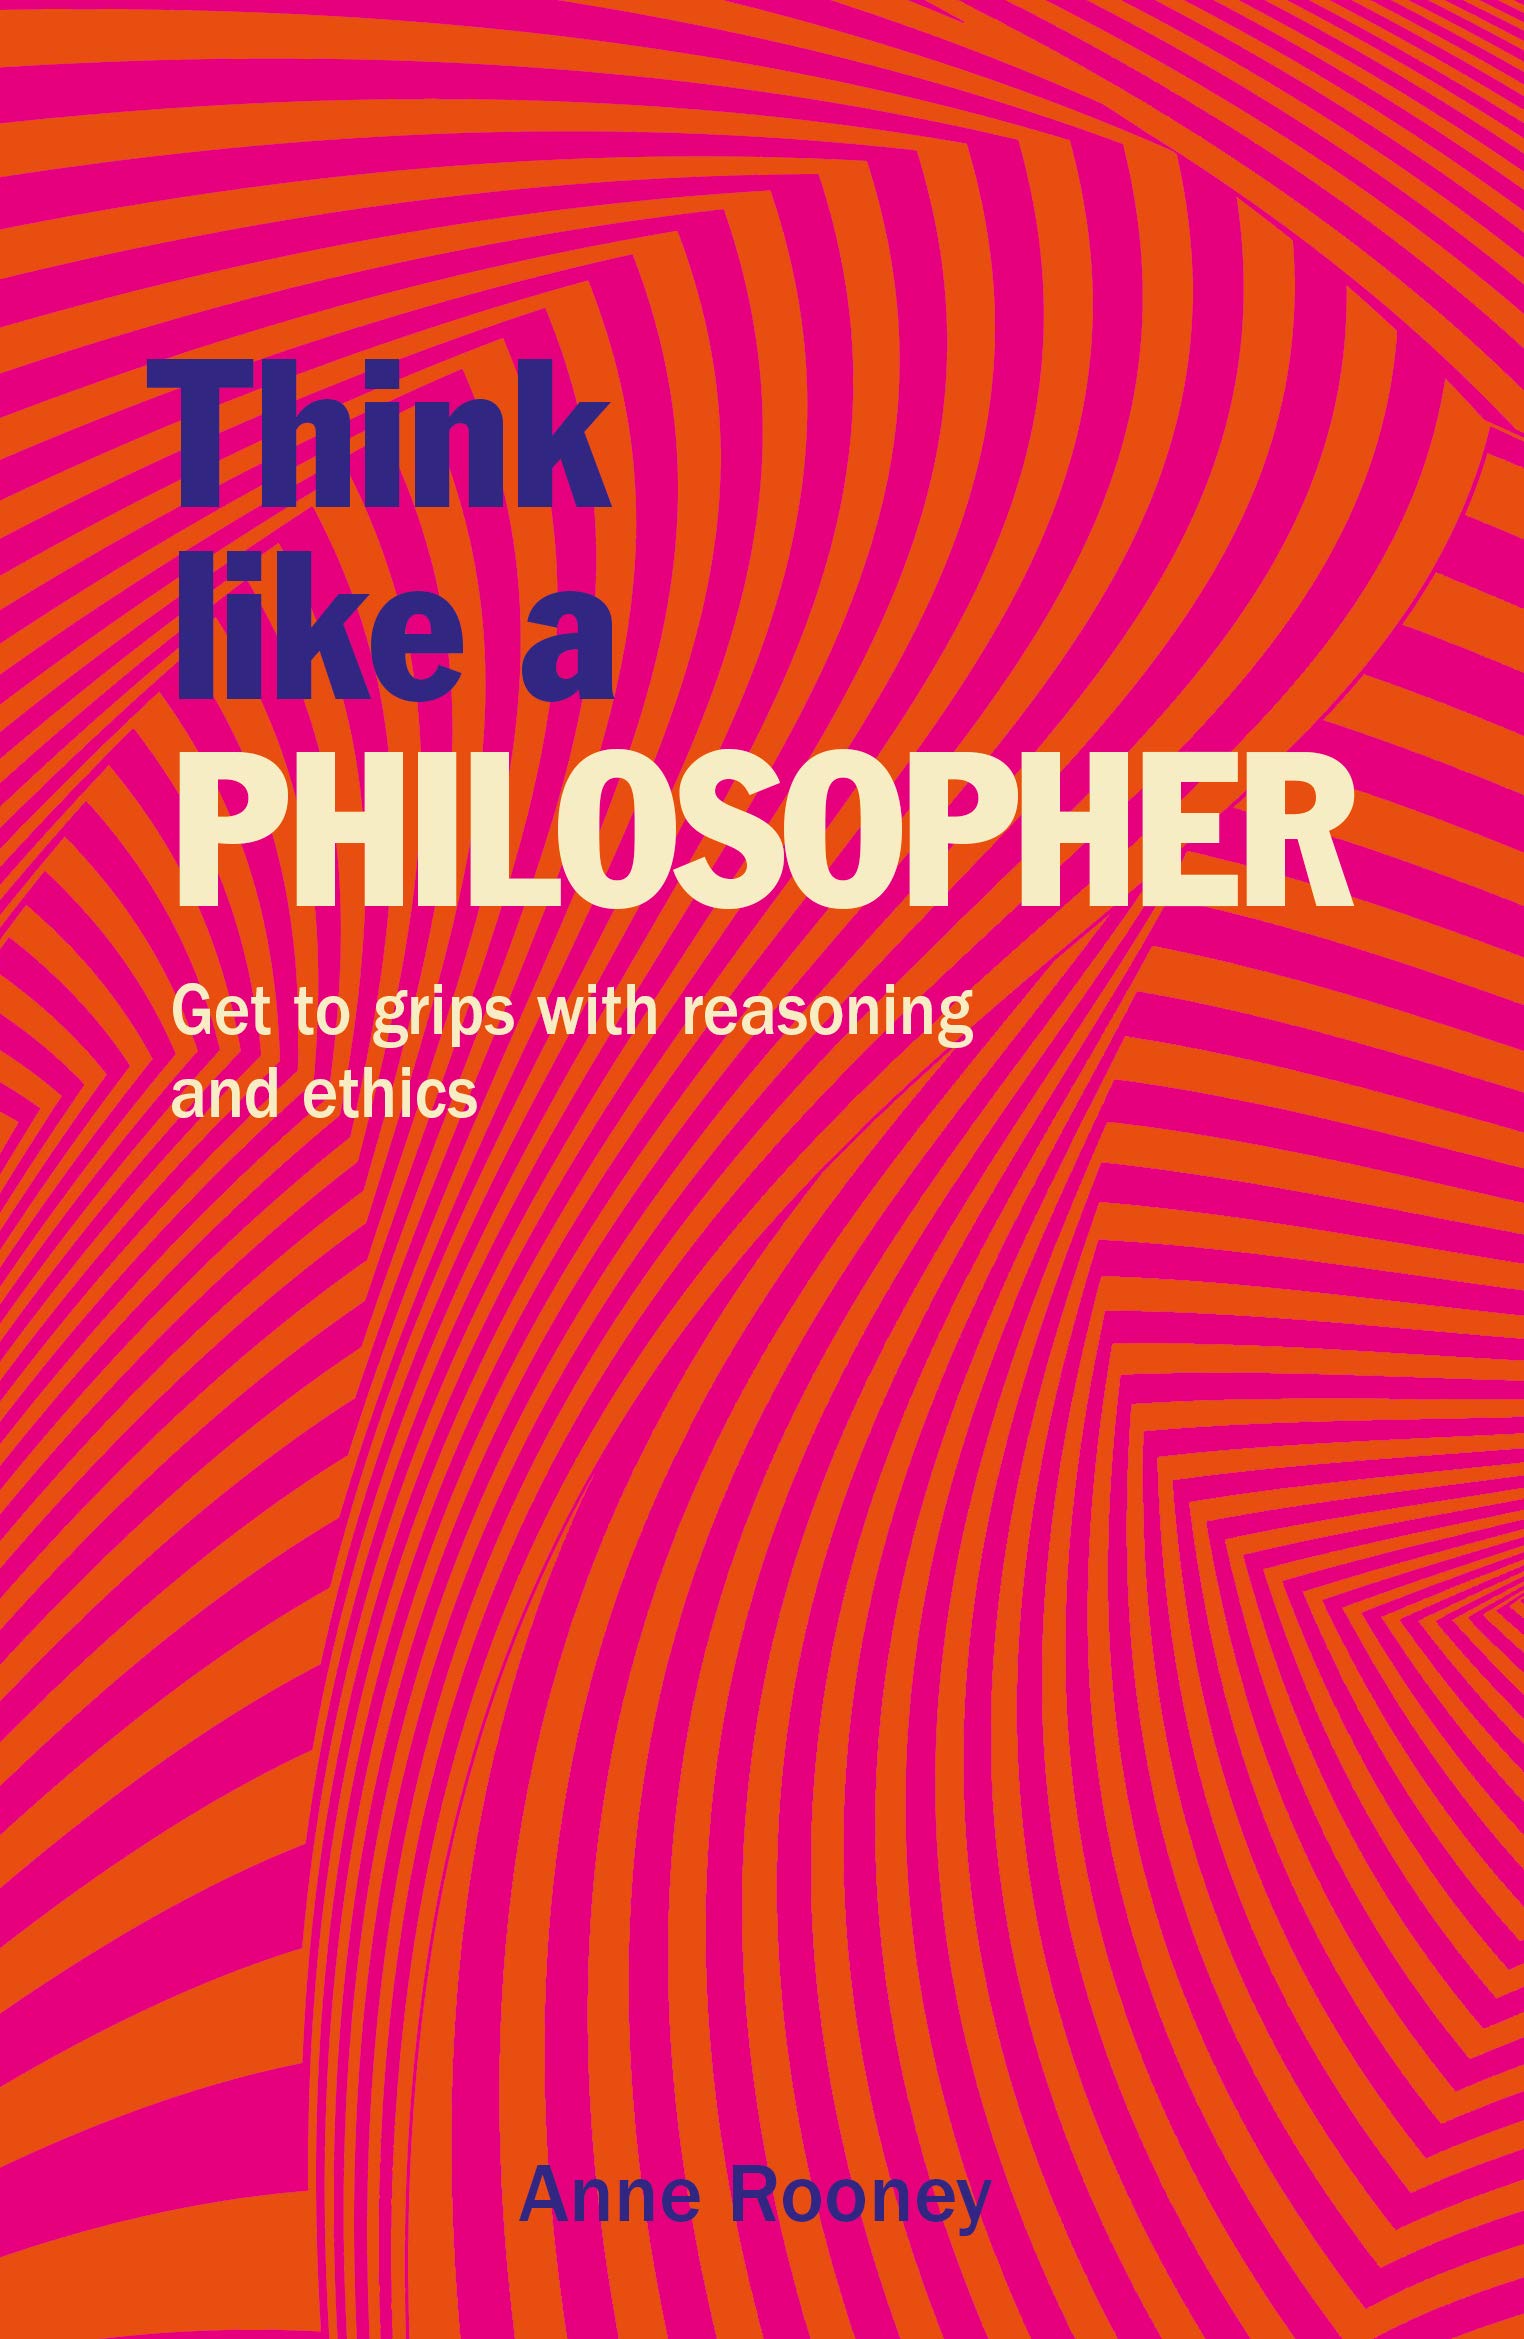 Think Like a Philosopher - Anne Rooney